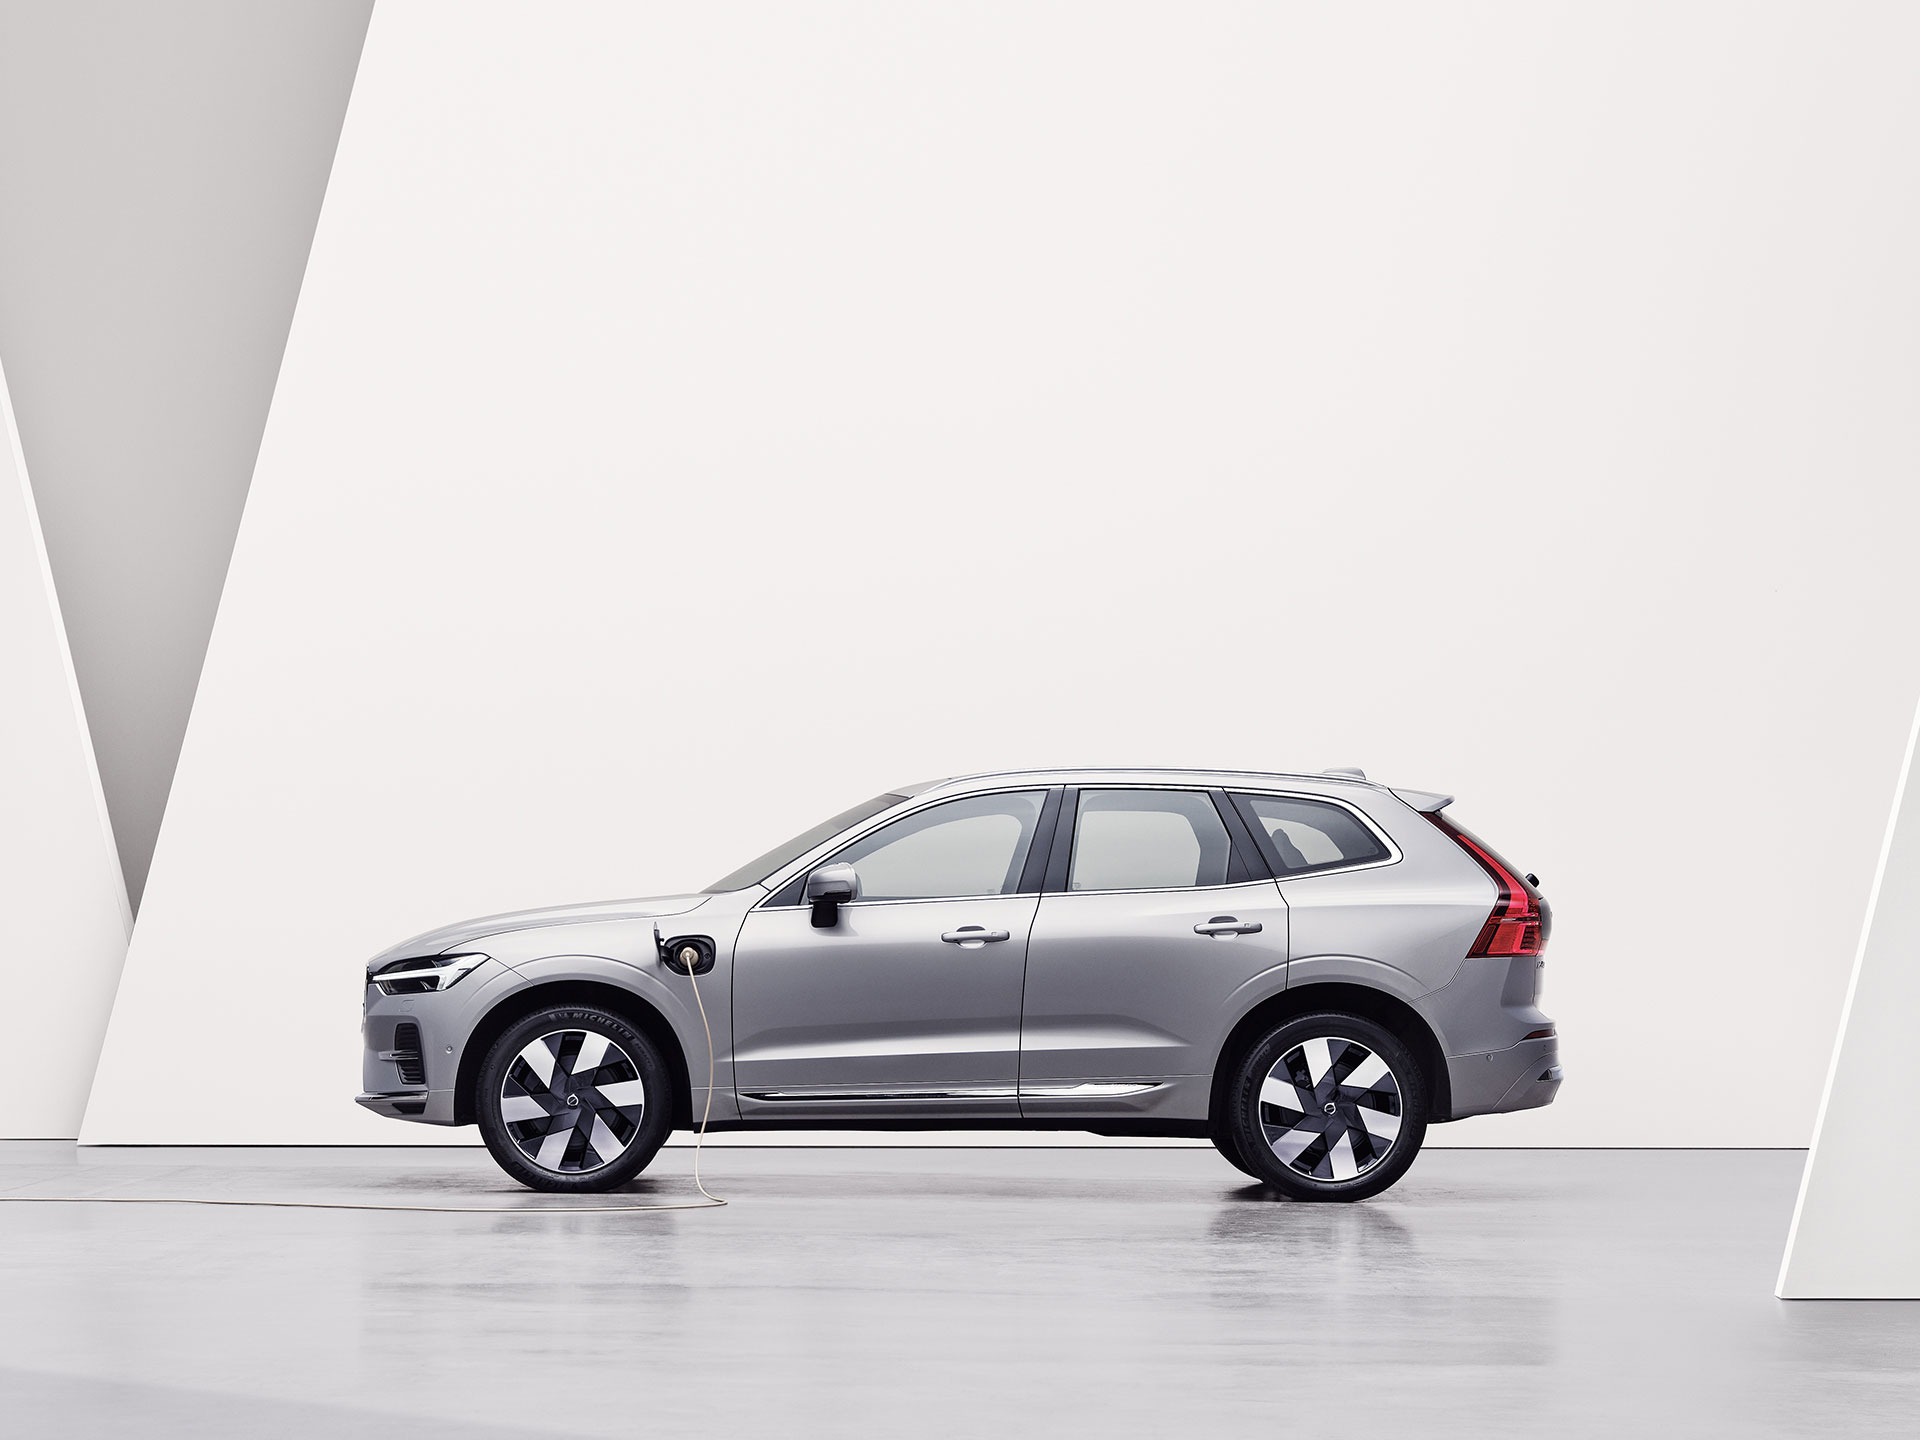 A silver Volvo XC60 Recharge, charging in a white surrounding.